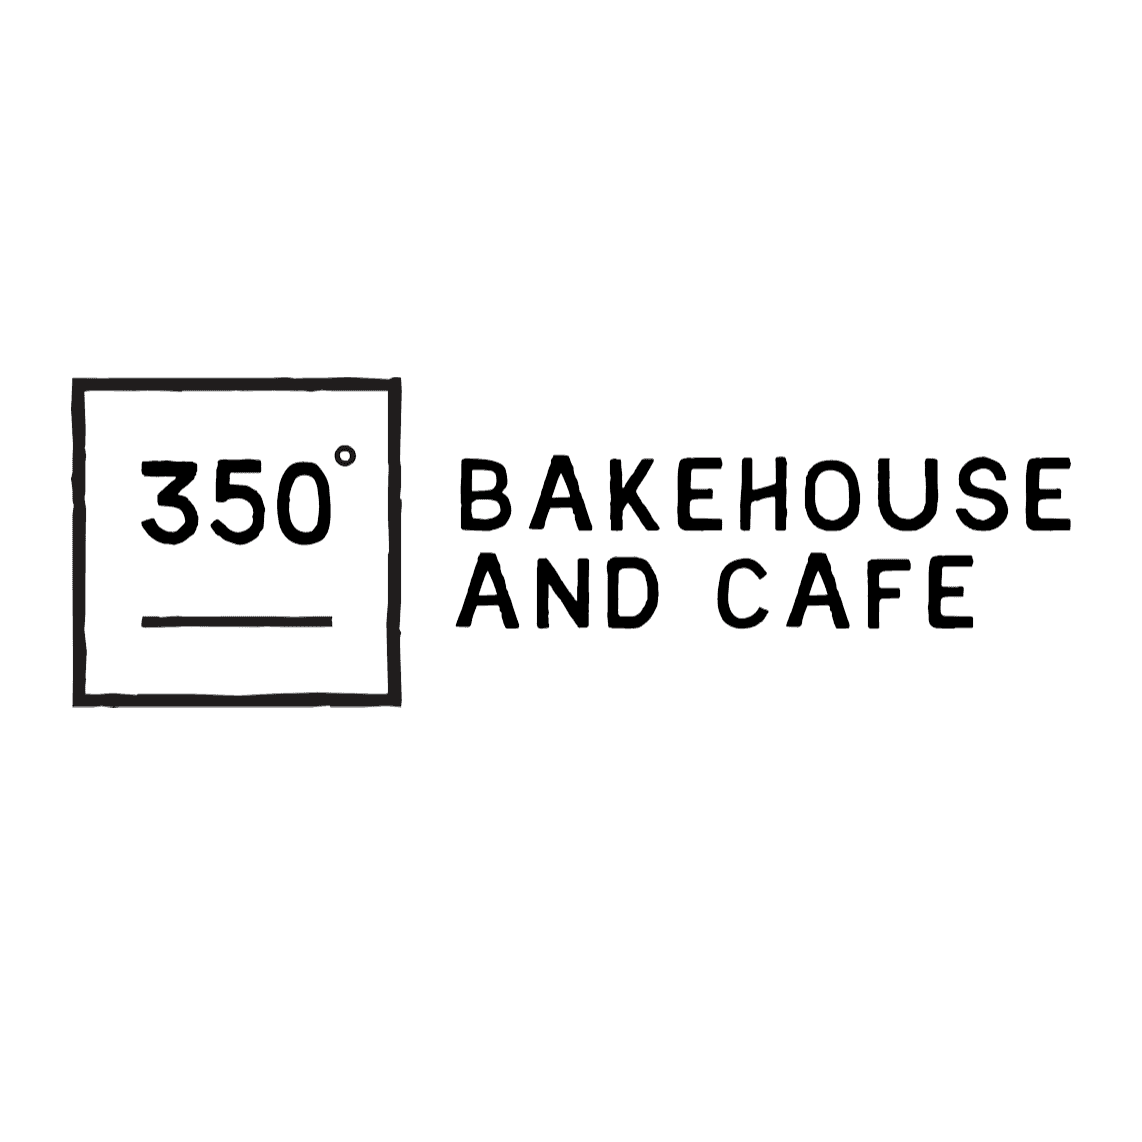 <p><span style="background-color: rgb(255, 255, 255);">350° Bakehouse and Cafe</span></p> logo